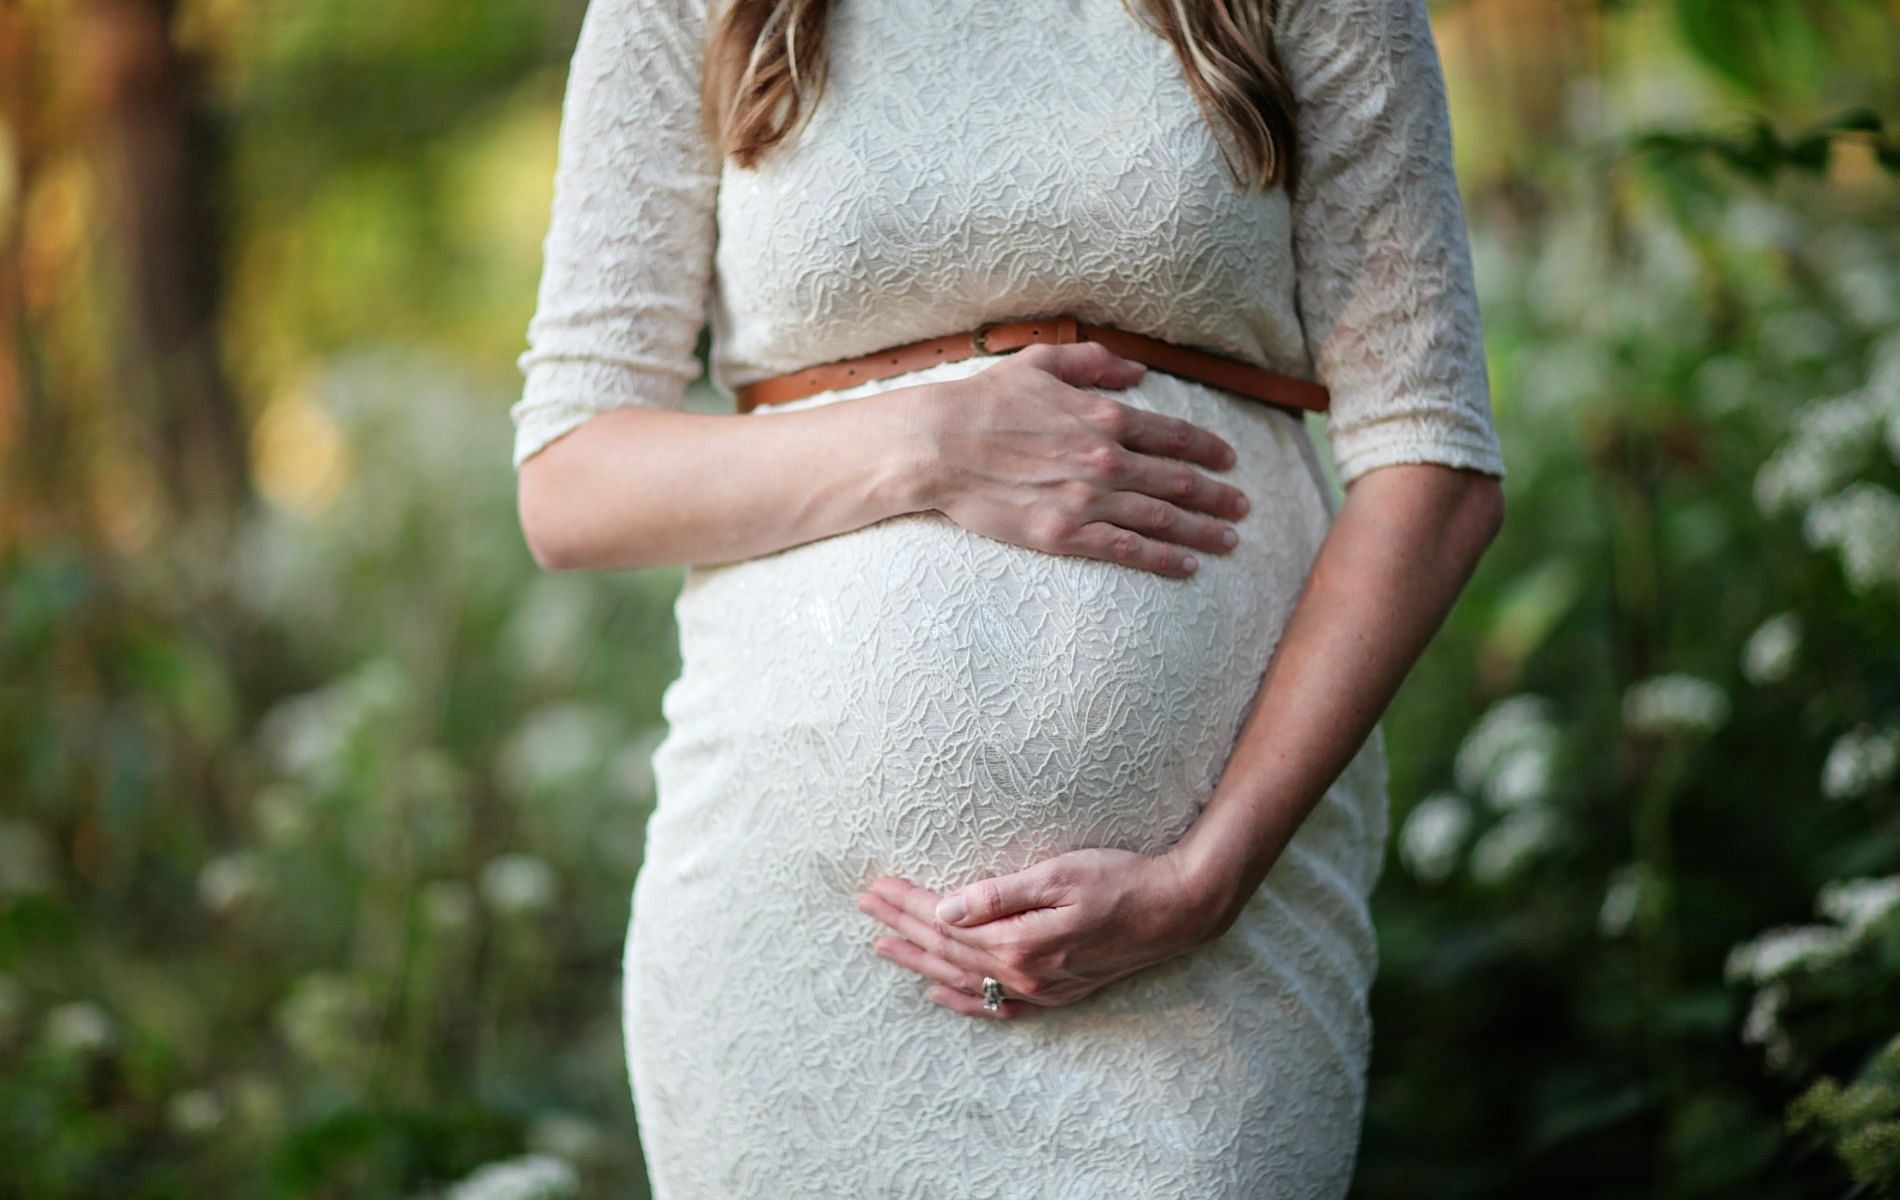 Pregnant women should be very careful of taking vitamin supplements (Image by Leah Kelley via Pexels)